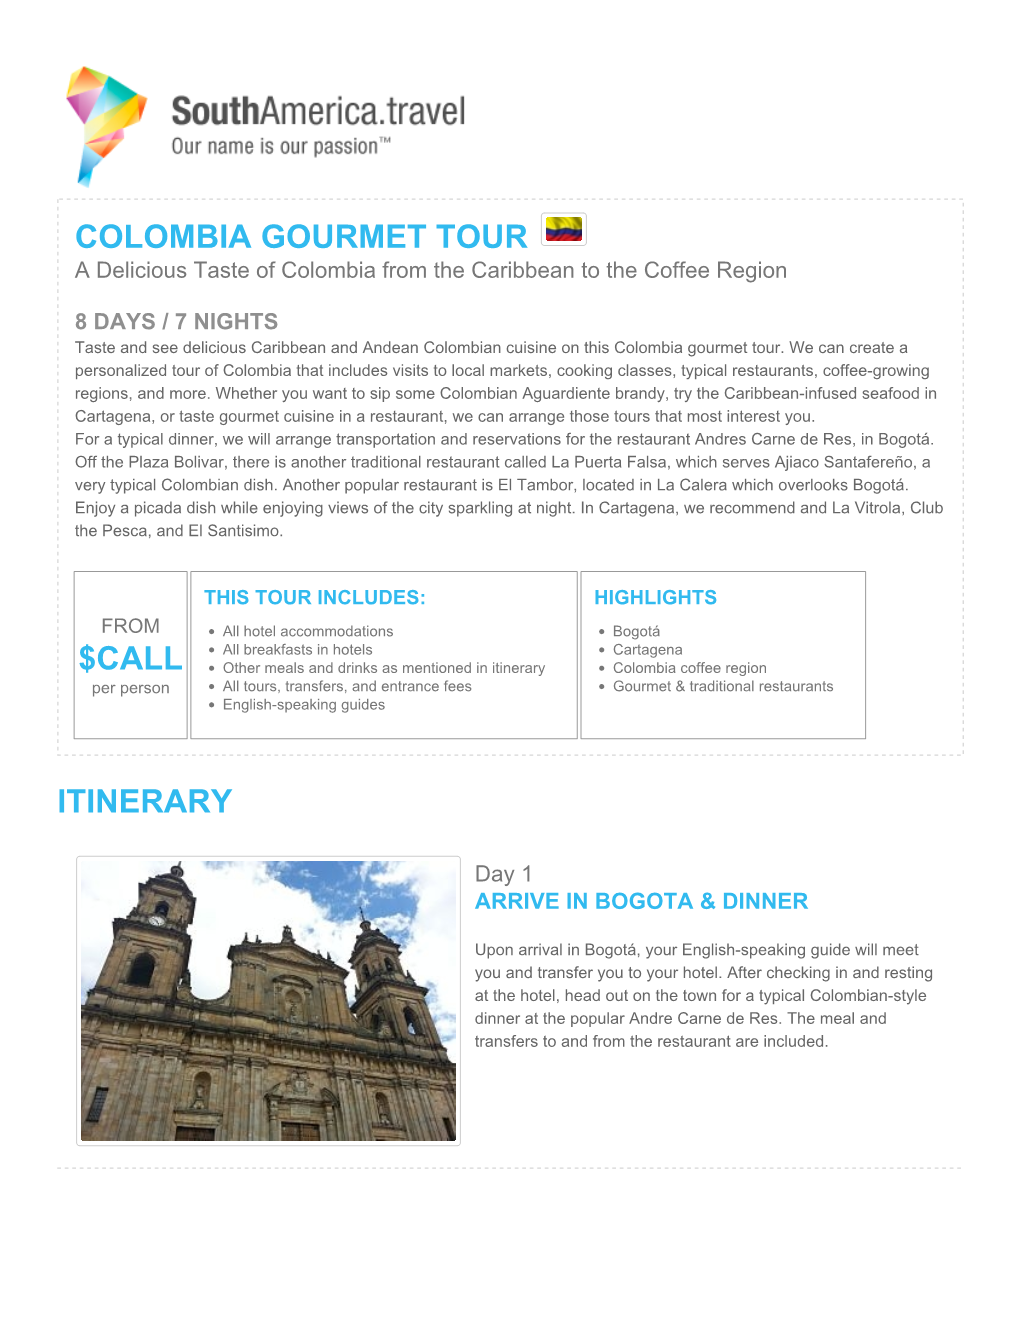 COLOMBIA GOURMET TOUR a Delicious Taste of Colombia from the Caribbean to the Coffee Region